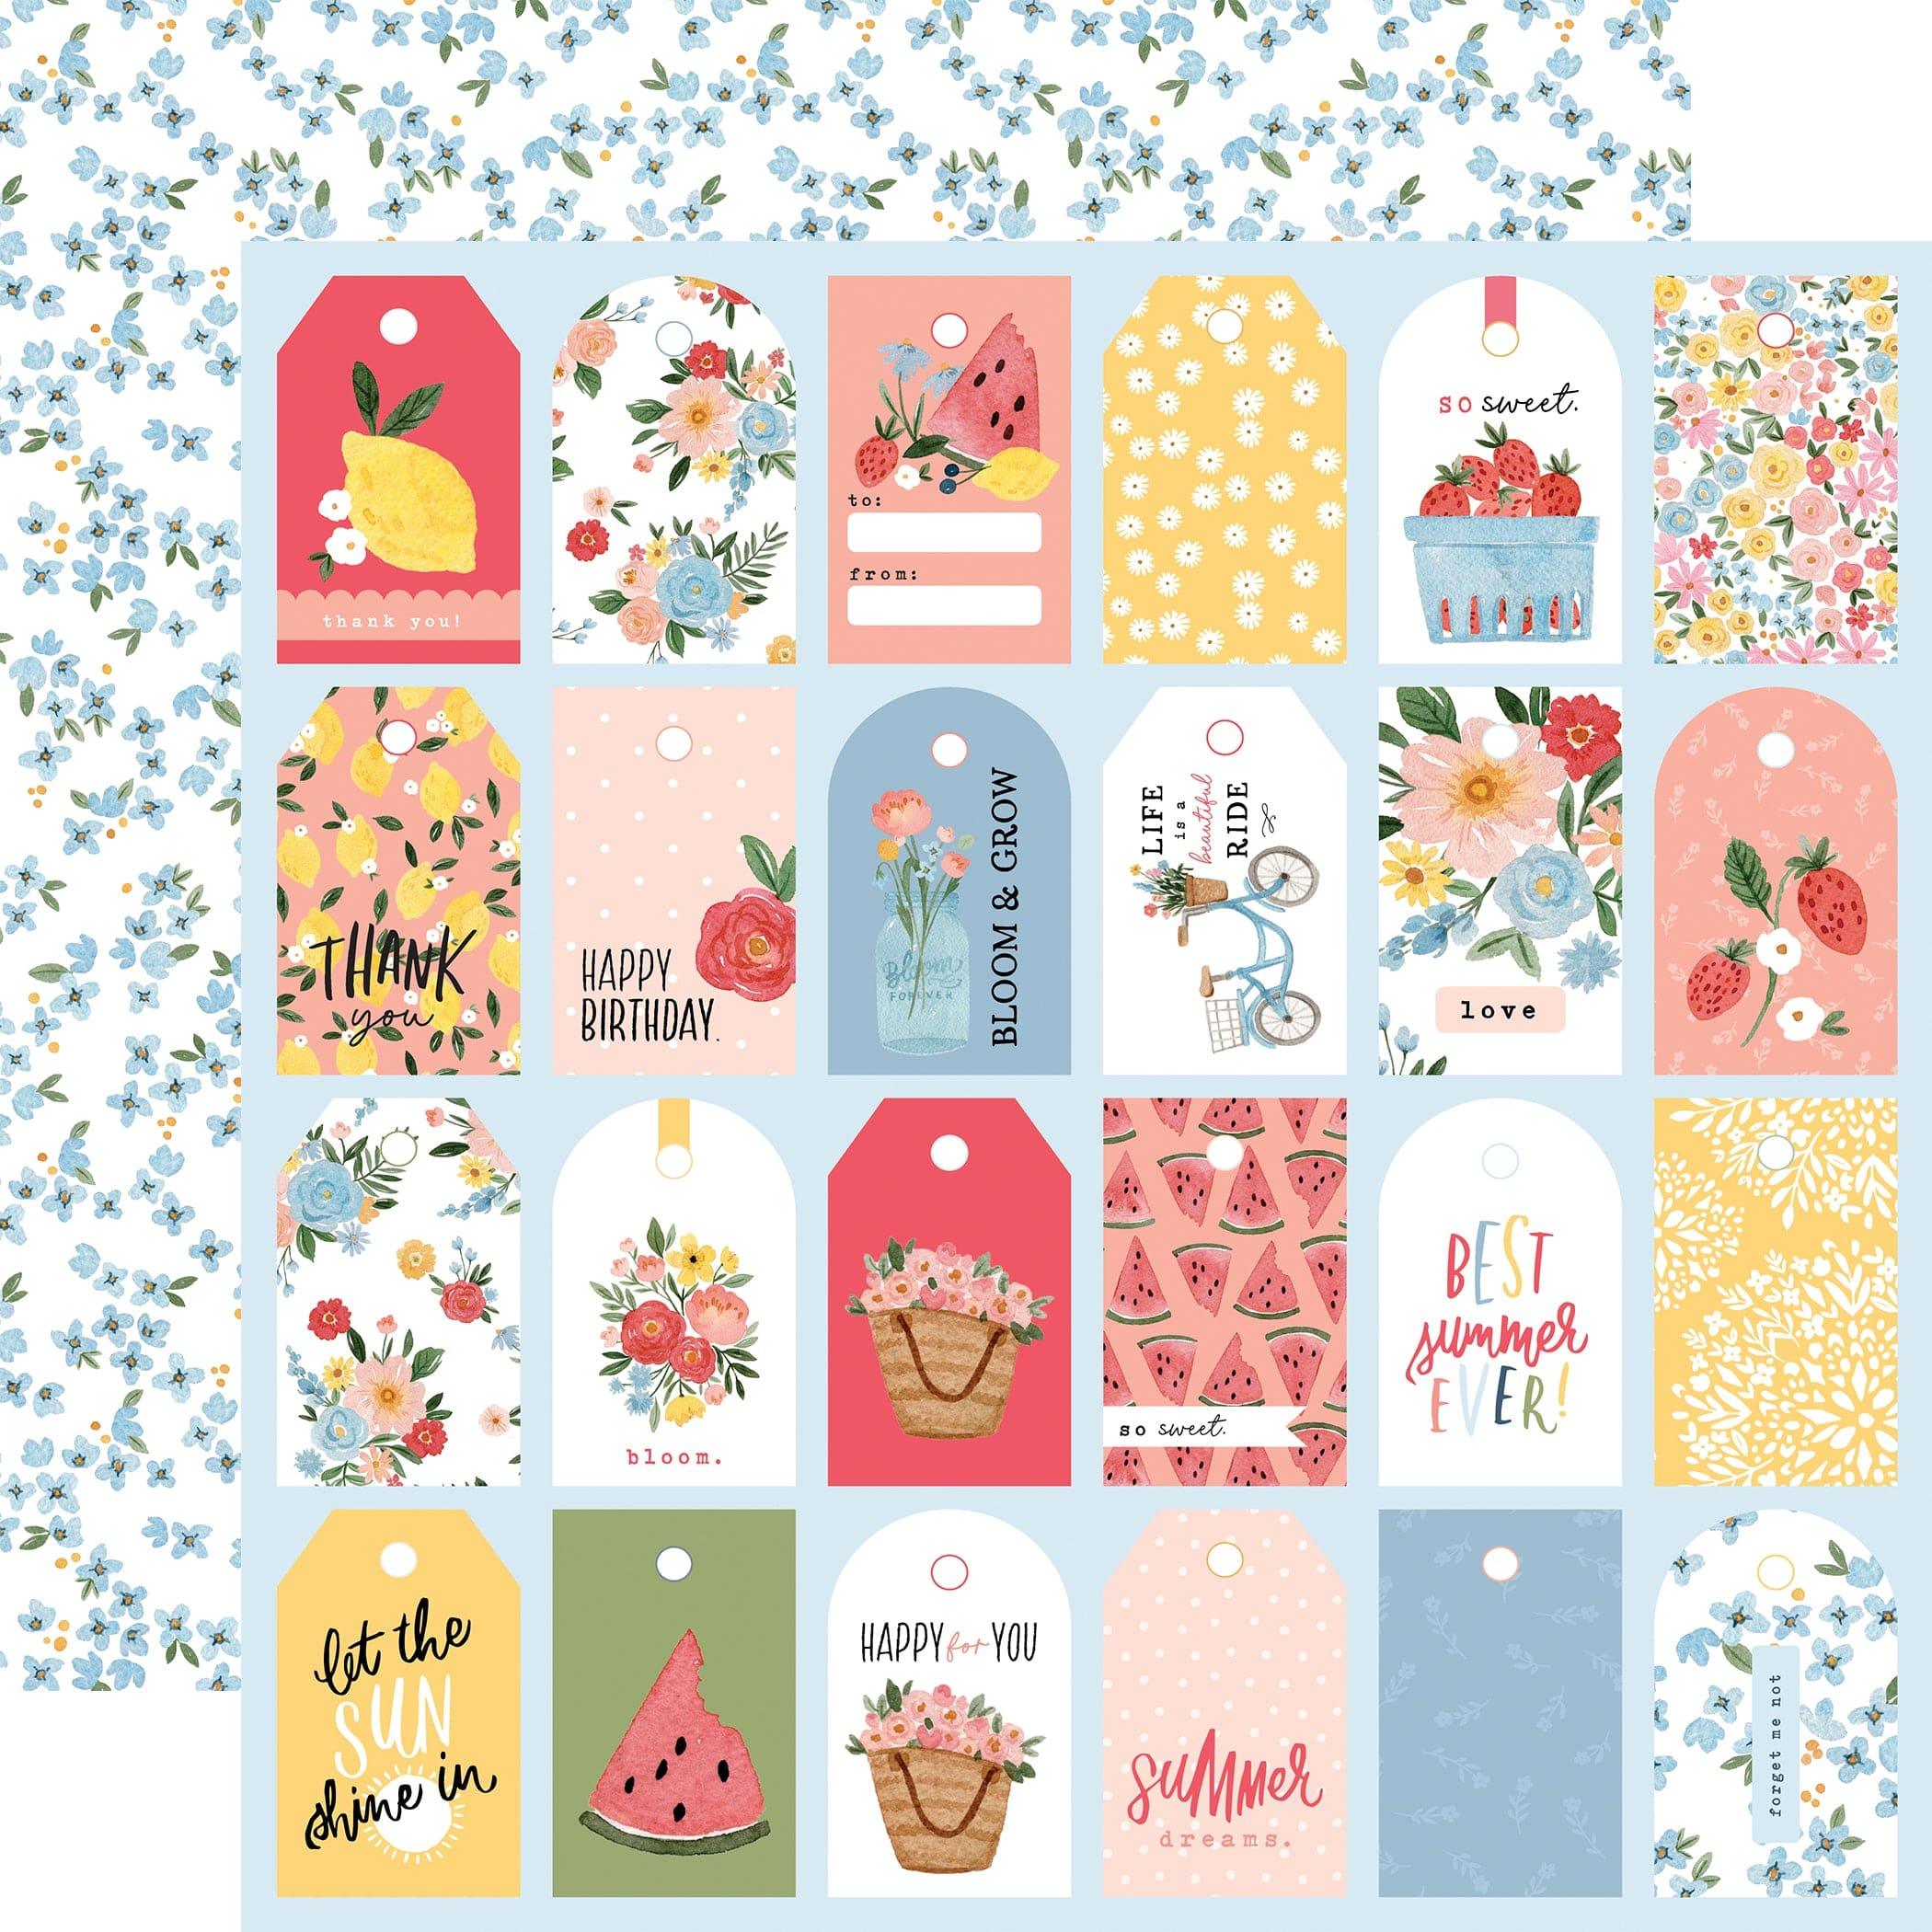 Summer Collection So Sweet Tags 12 x 12 Double-Sided Scrapbook Paper by Carta Bella - Scrapbook Supply Companies